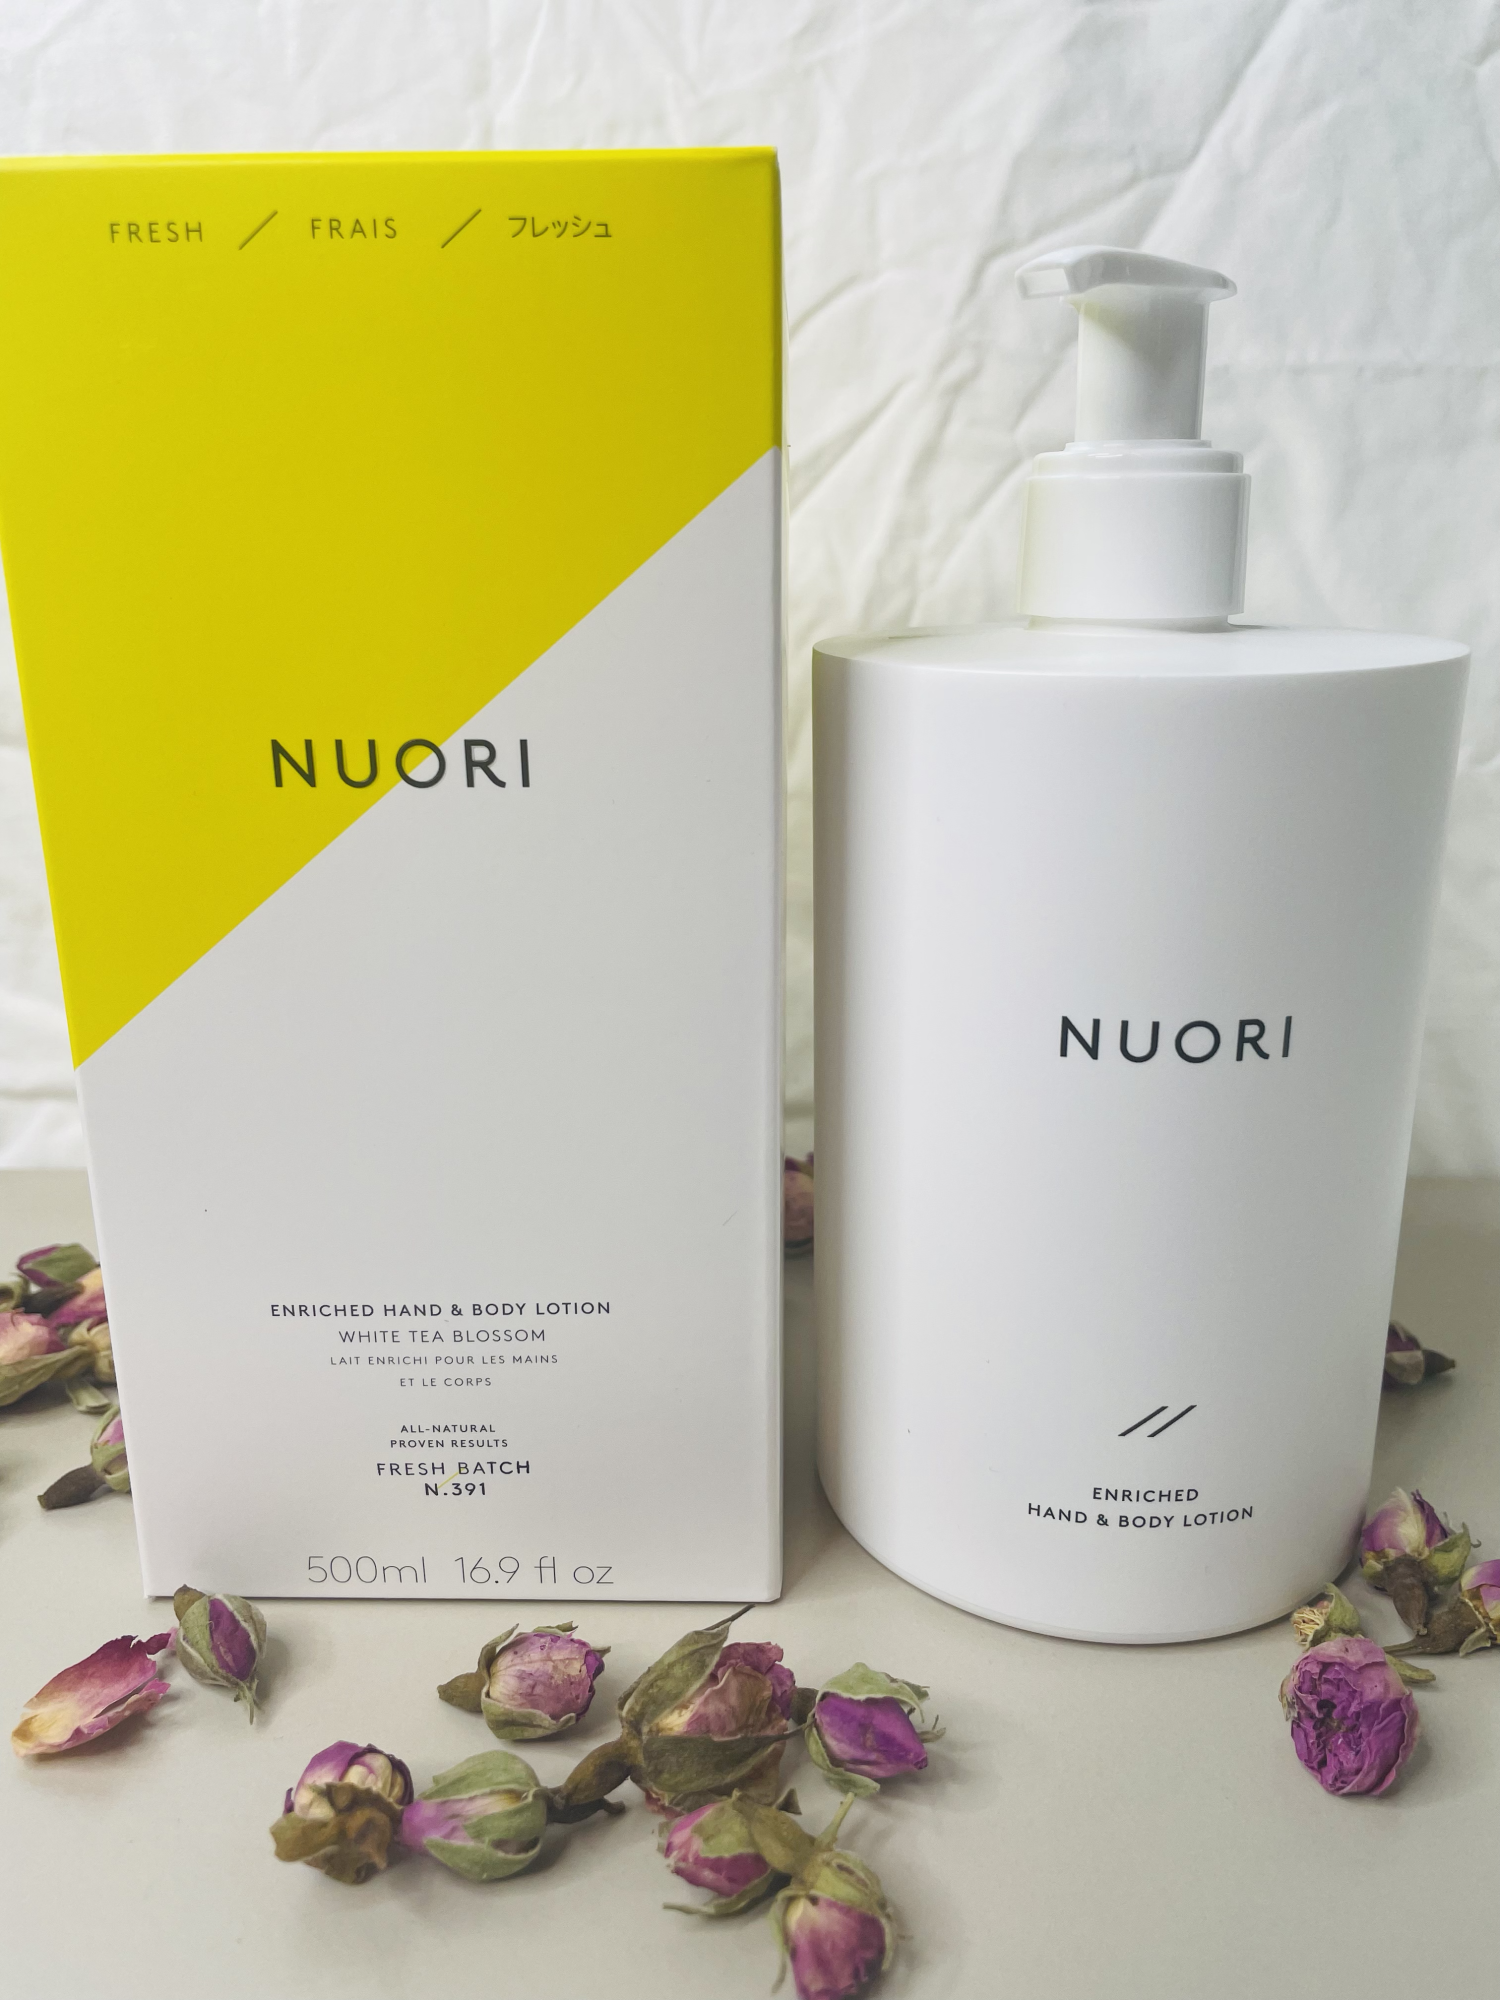 NUORI Enriched Hand & Body Lotion